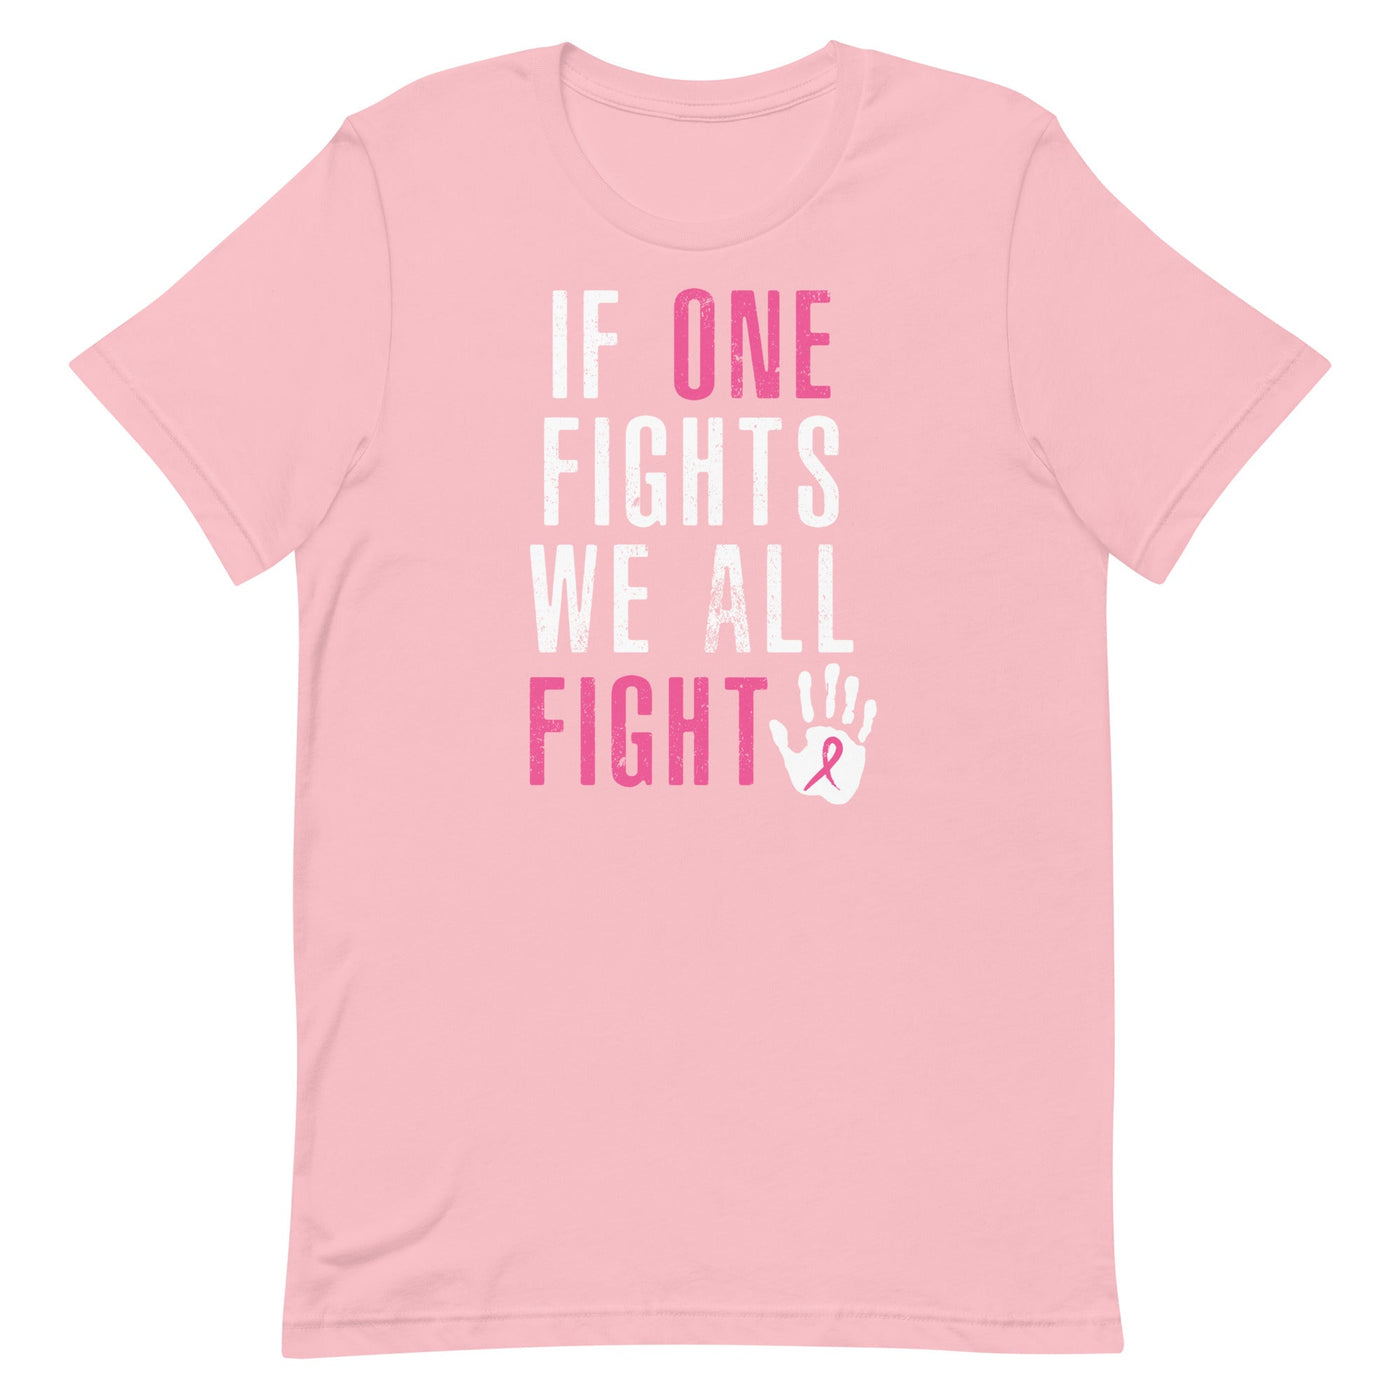 IF ONE FIGHTS WE ALL FIGHT WOMEN'S SHIRT - PINK AND WHITE FONT Pink S 